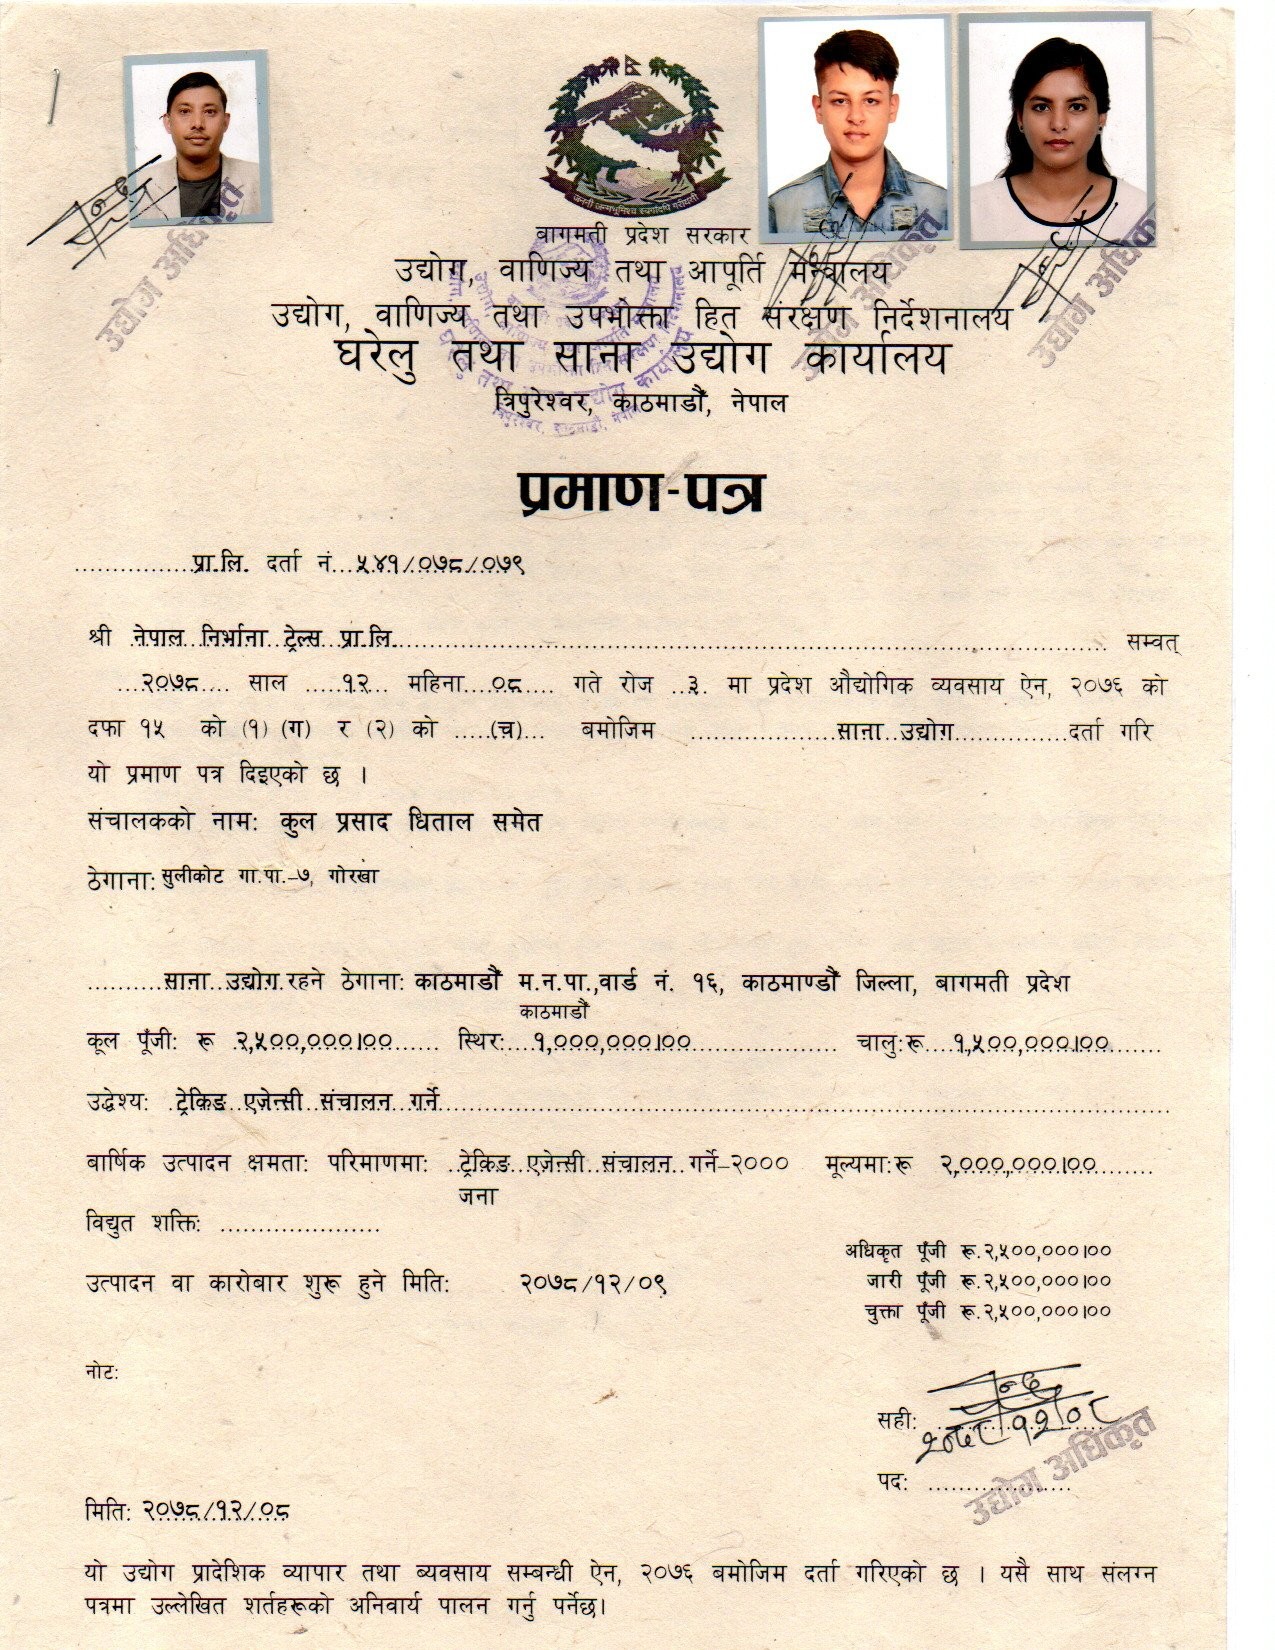 License from Department of Domestic Small Industry